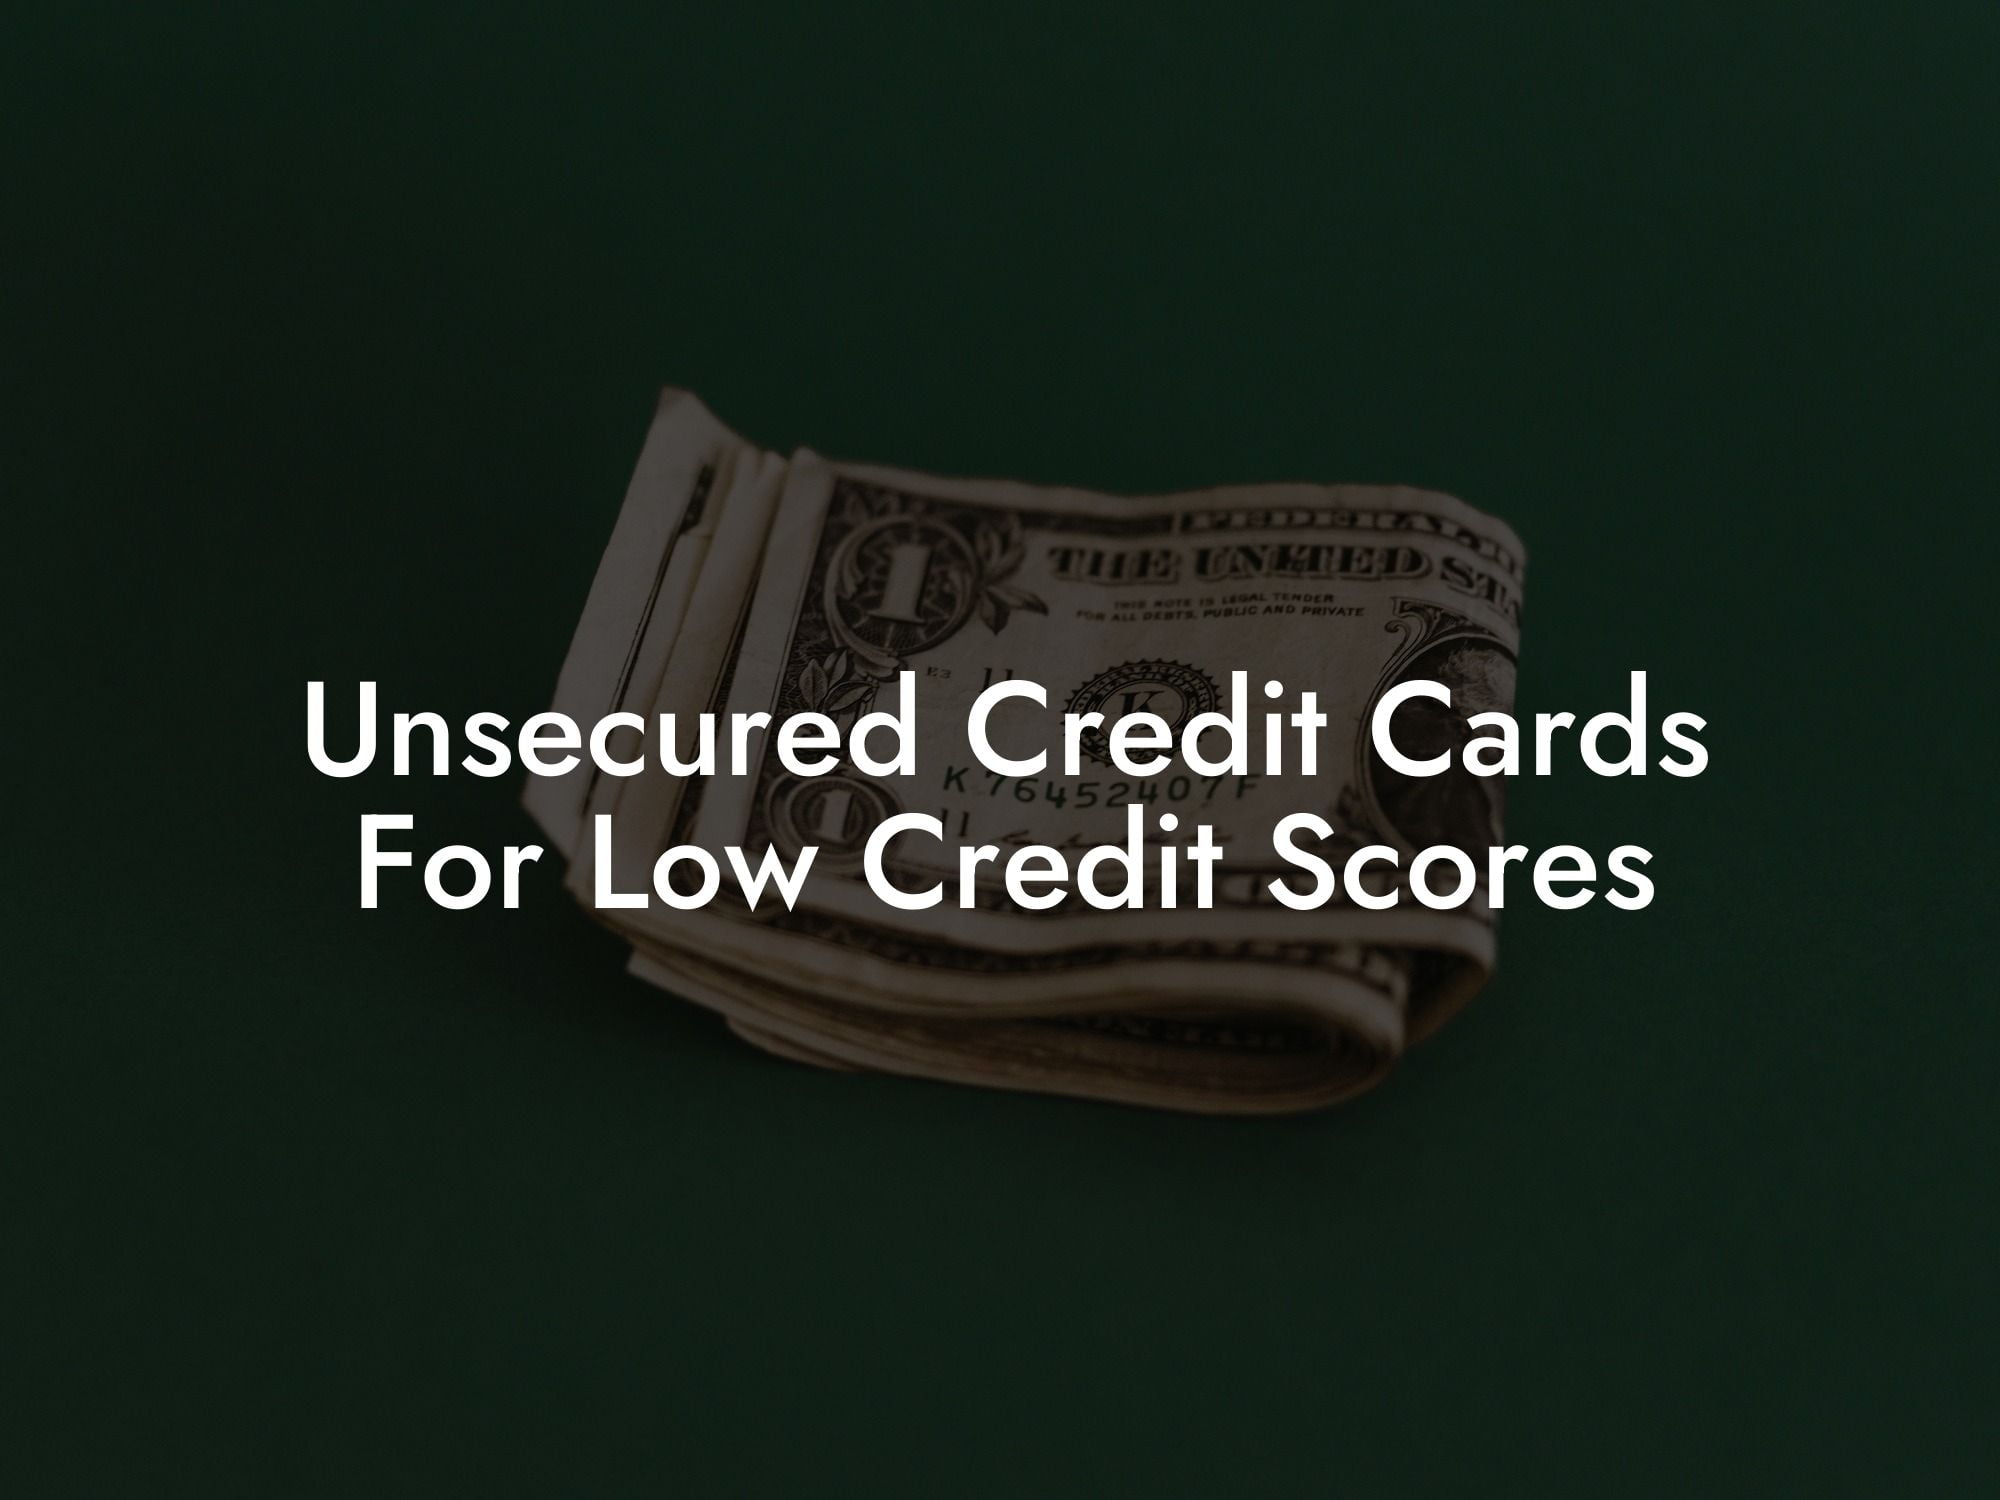 Unsecured Credit Cards For Low Credit Scores